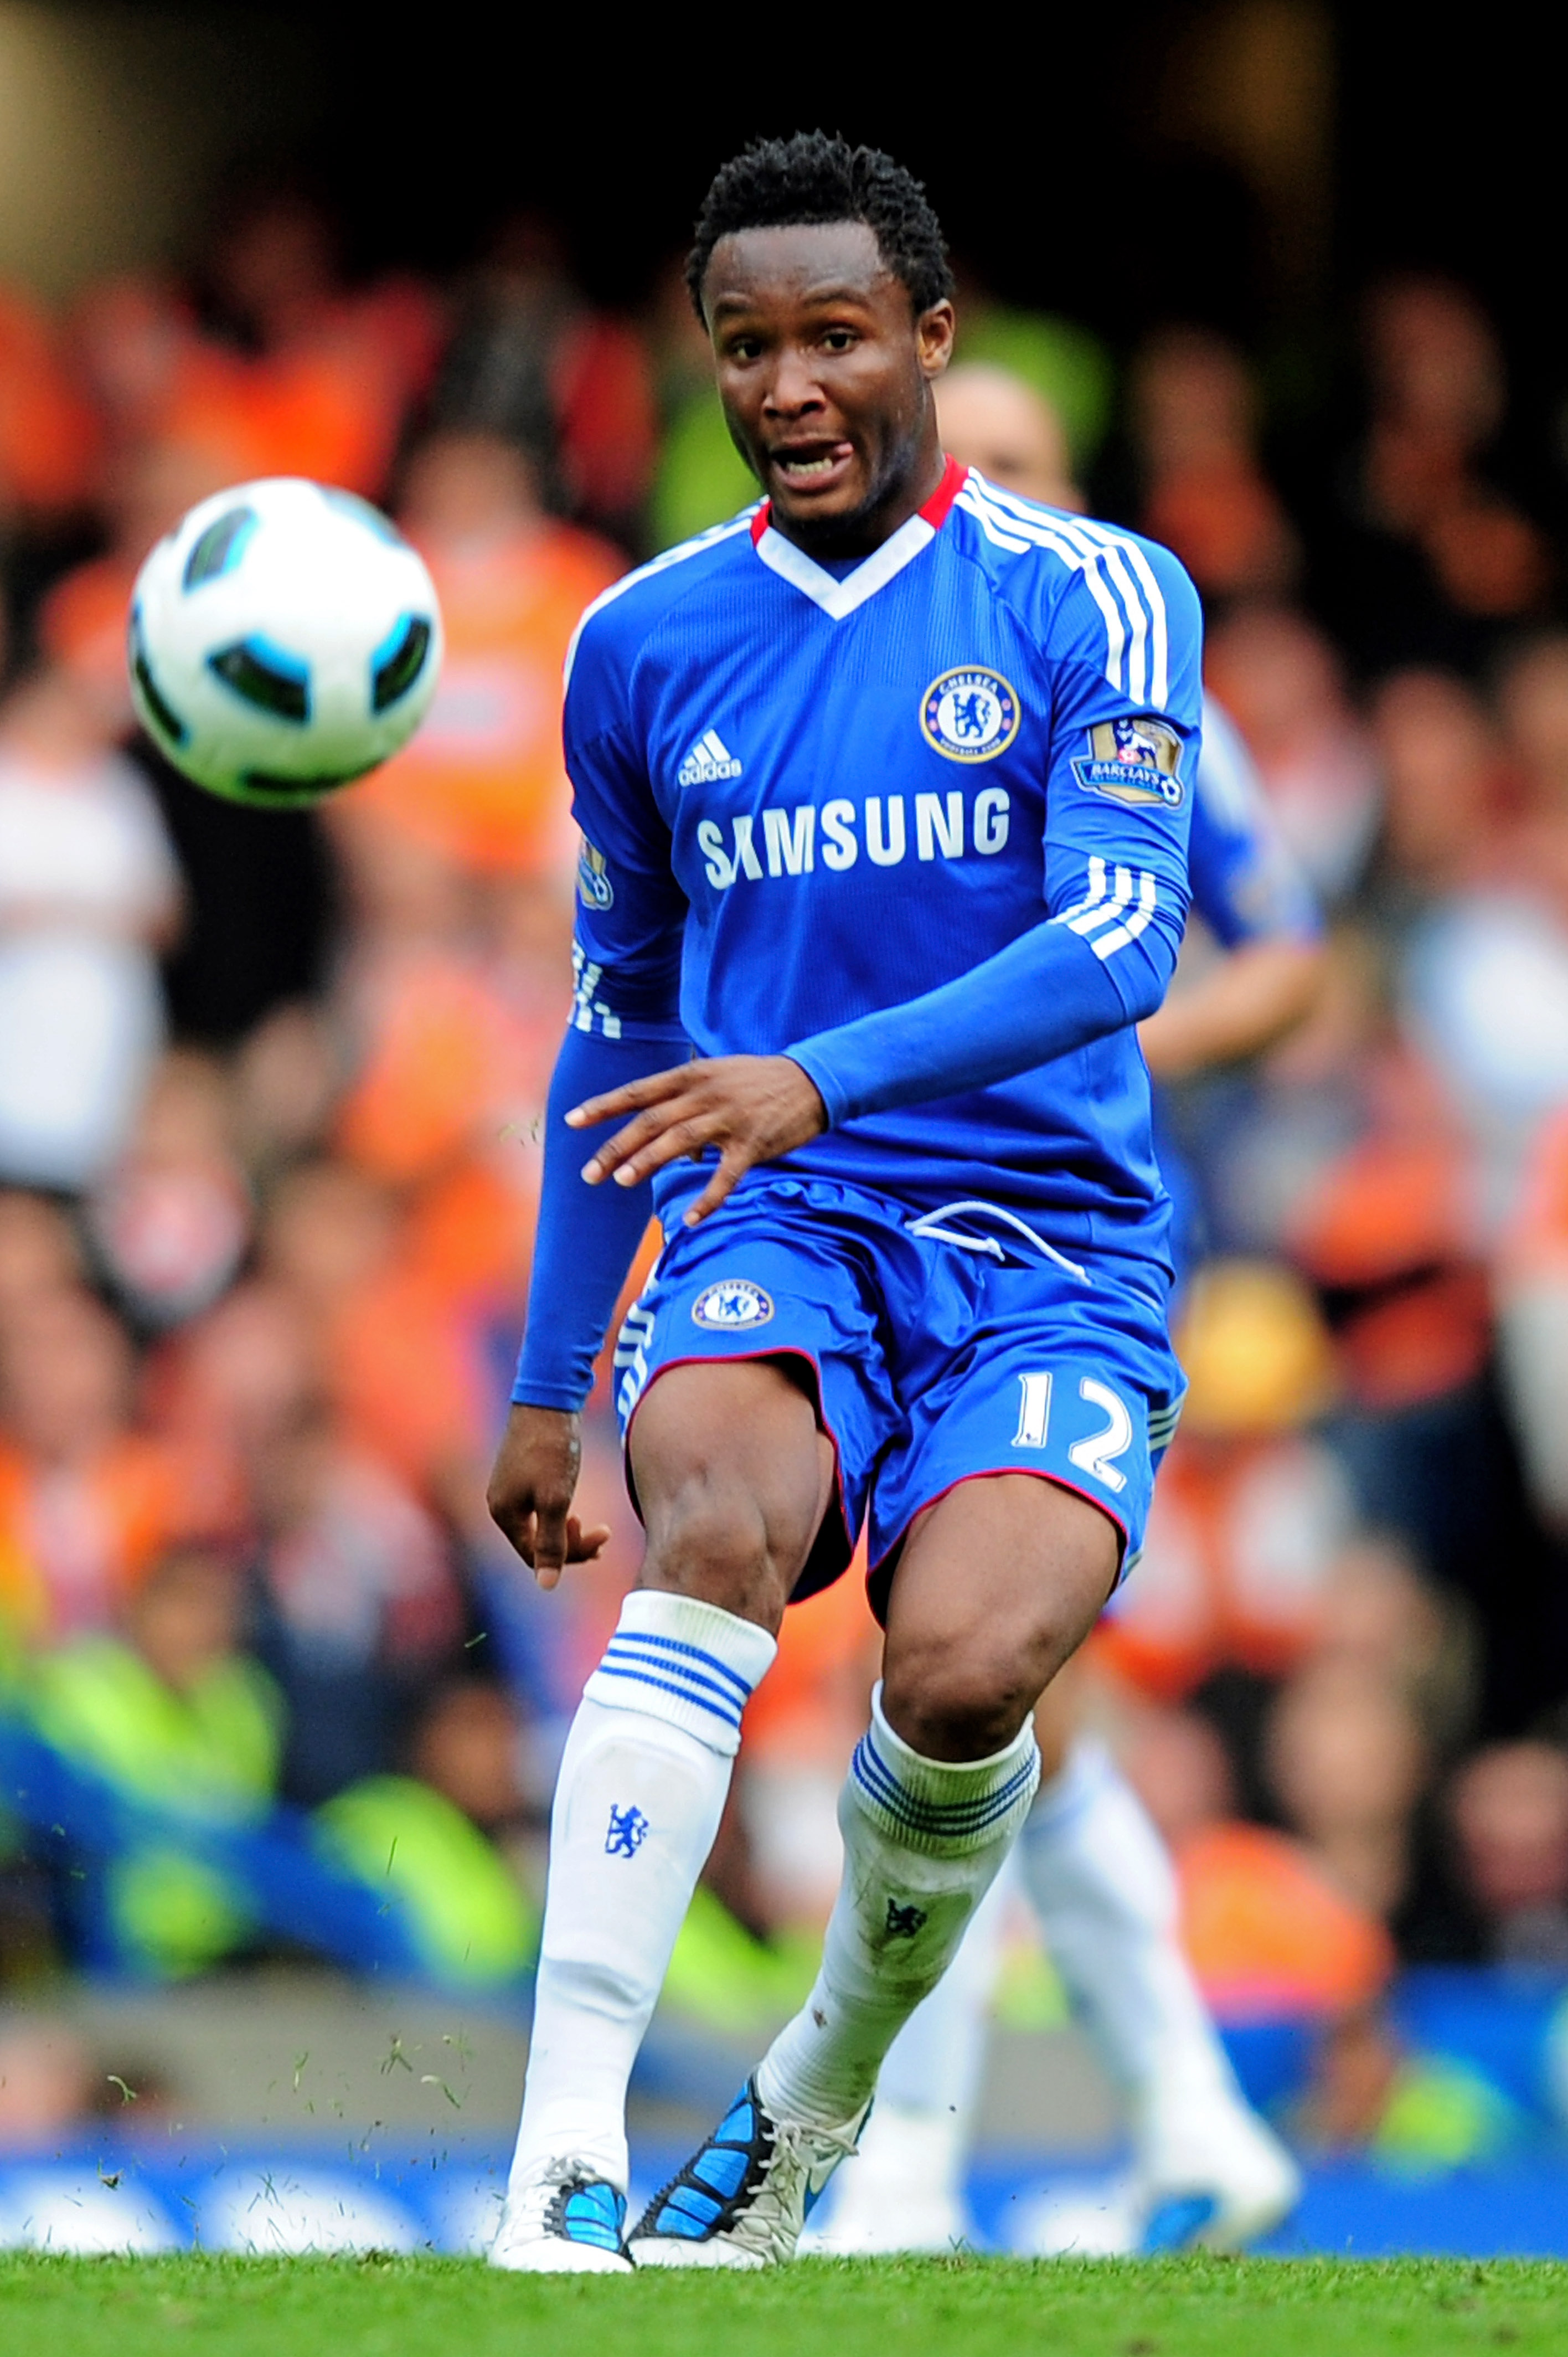 LONDON, ENGLAND - SEPTEMBER 19:  John Obi Mikel of Chelsea passes the ball during the Barclays Premier League match between Chelsea and Blackpool at Stamford Bridge on September 19, 2010 in London, England.  (Photo by Mike Hewitt/Getty Images)